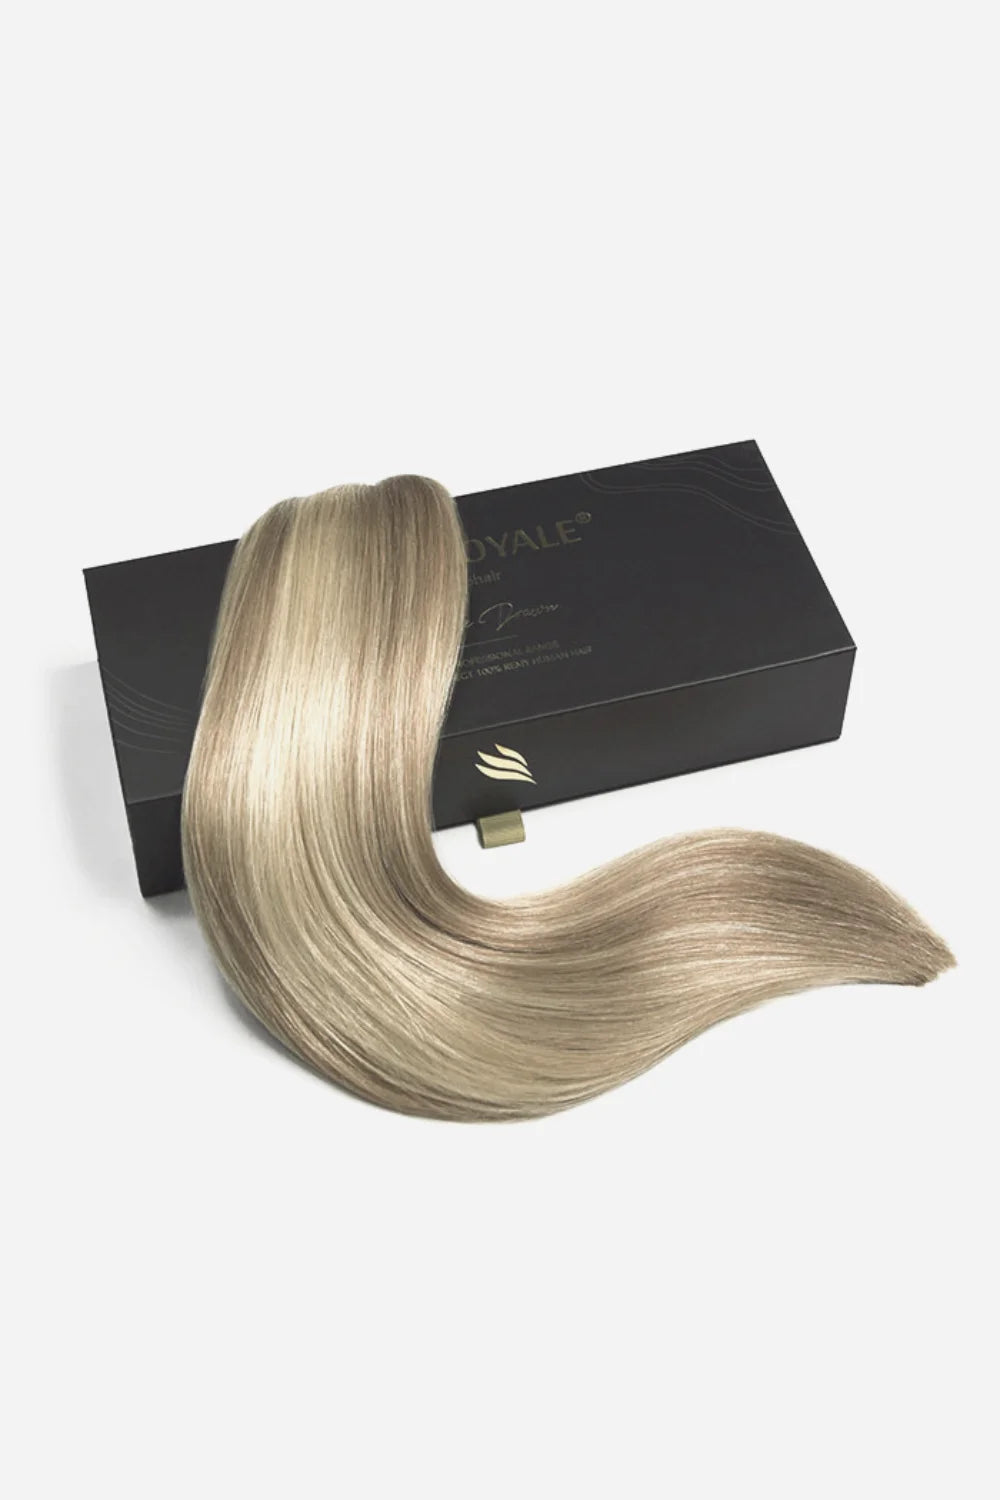 #8/60 remy royale hair weft extension box